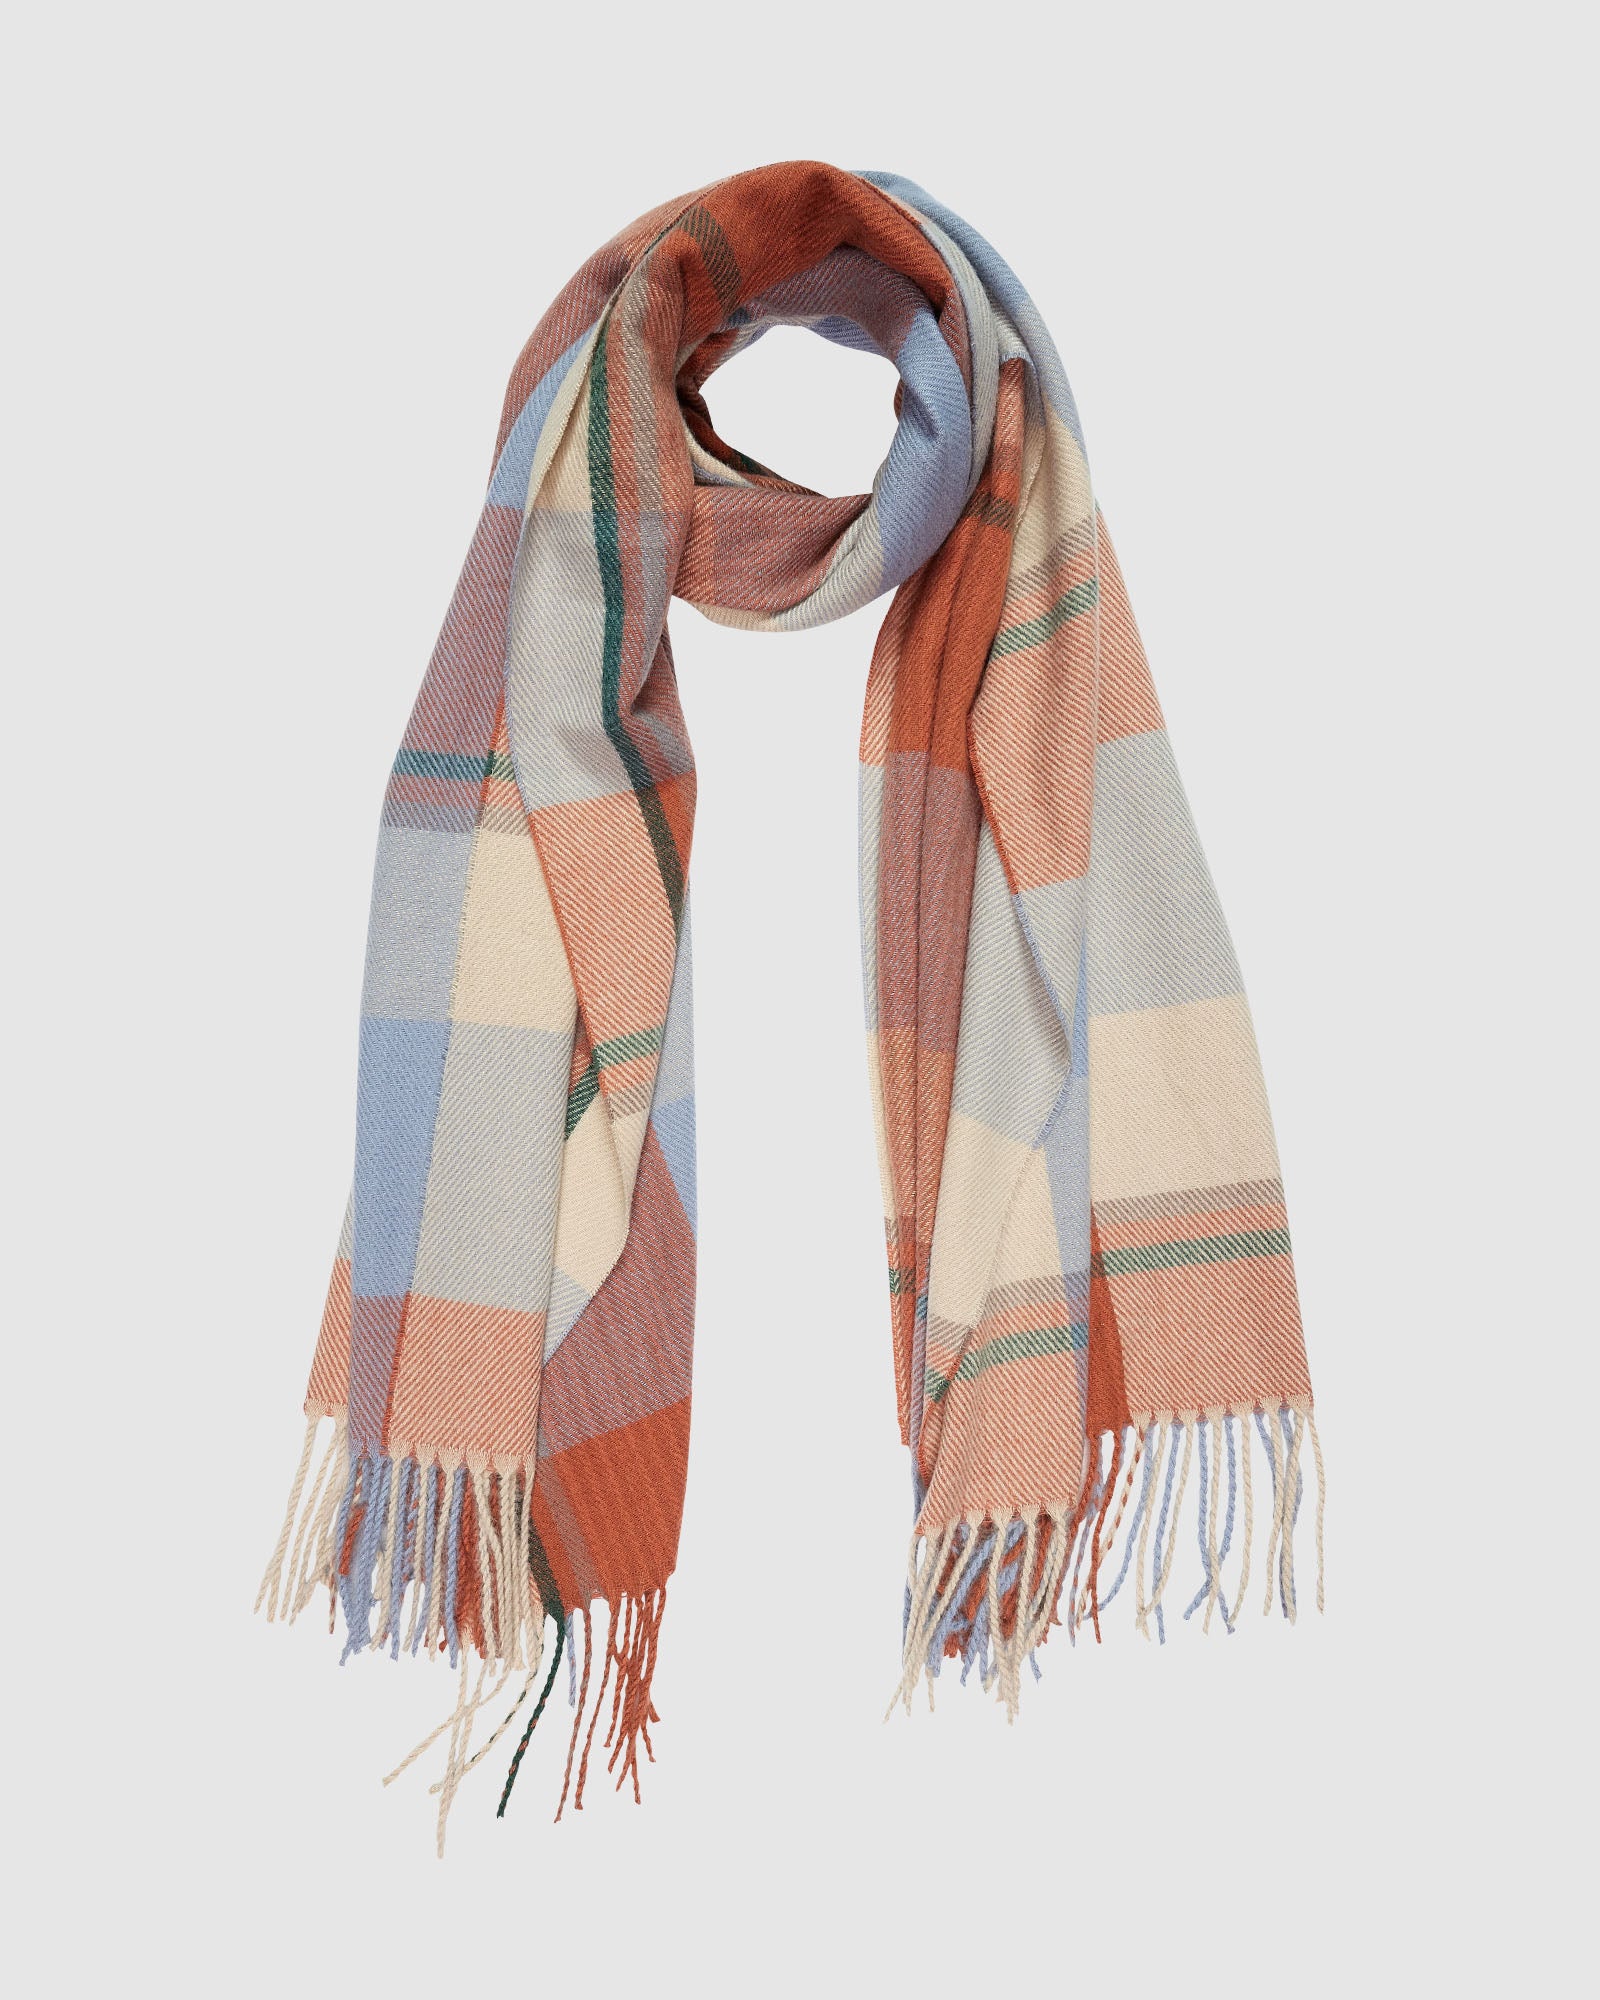 The Louenhide Balmoral Scarf features a cosy plaid pattern that adds a hint of colour to any wintery look.